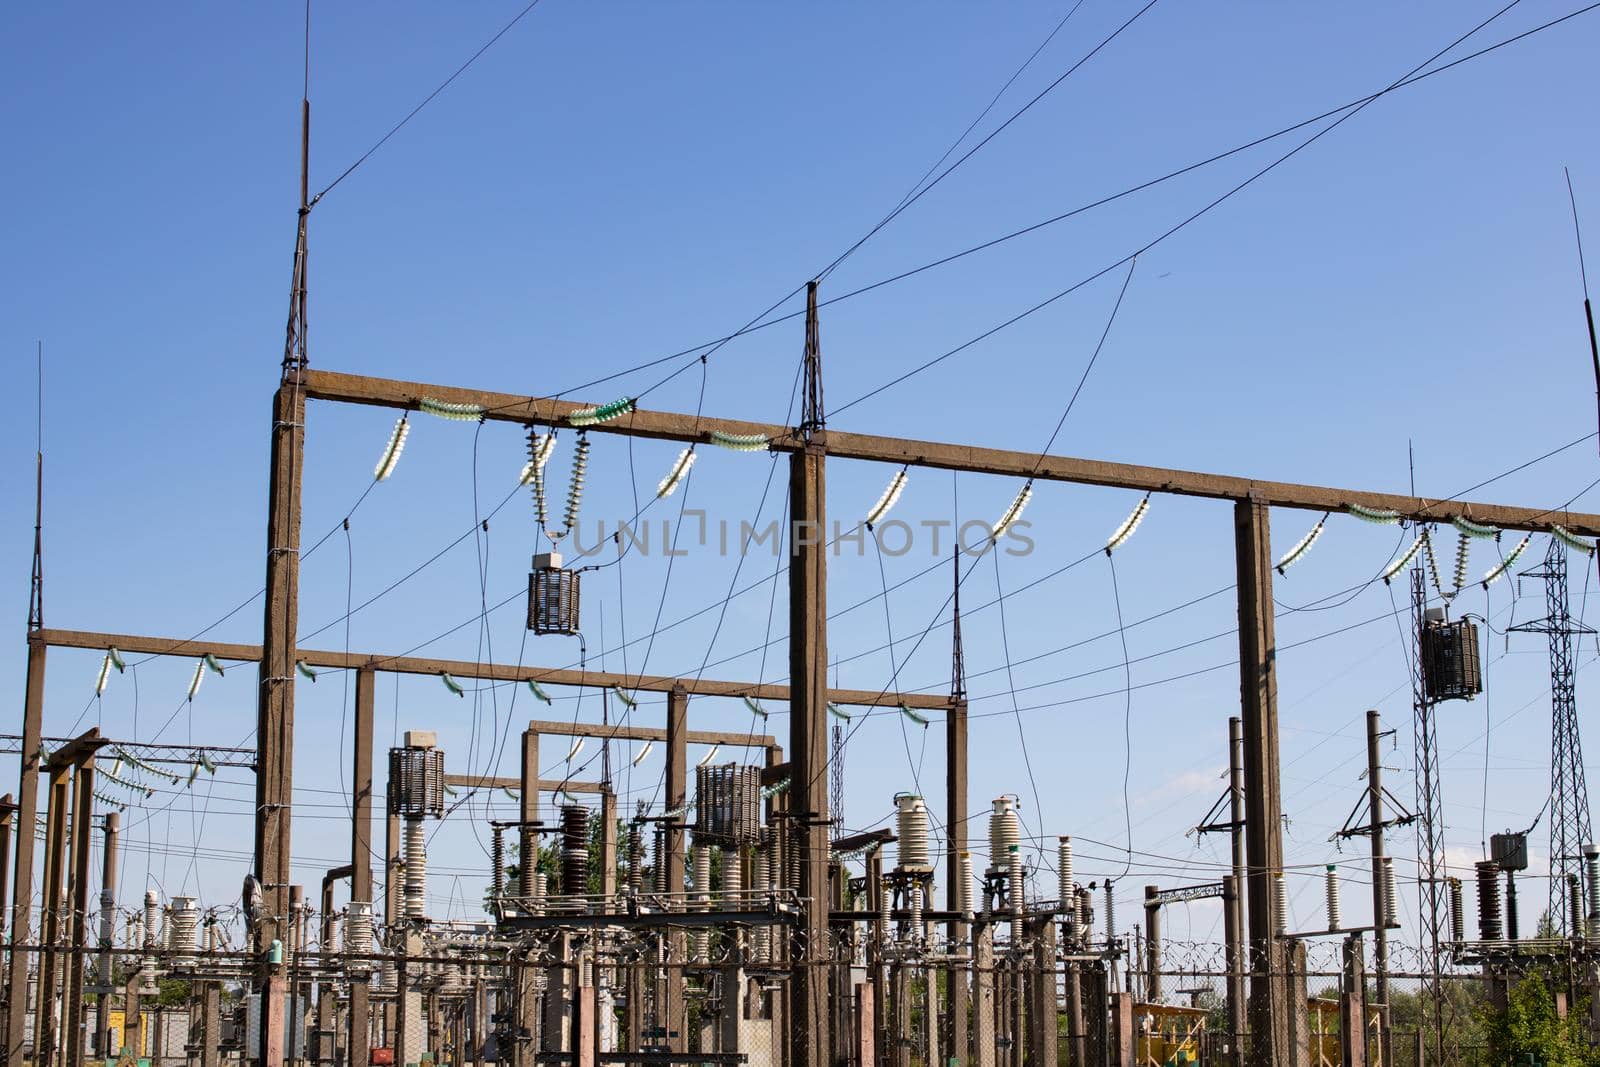 Pillars with power lines on a blue sky background